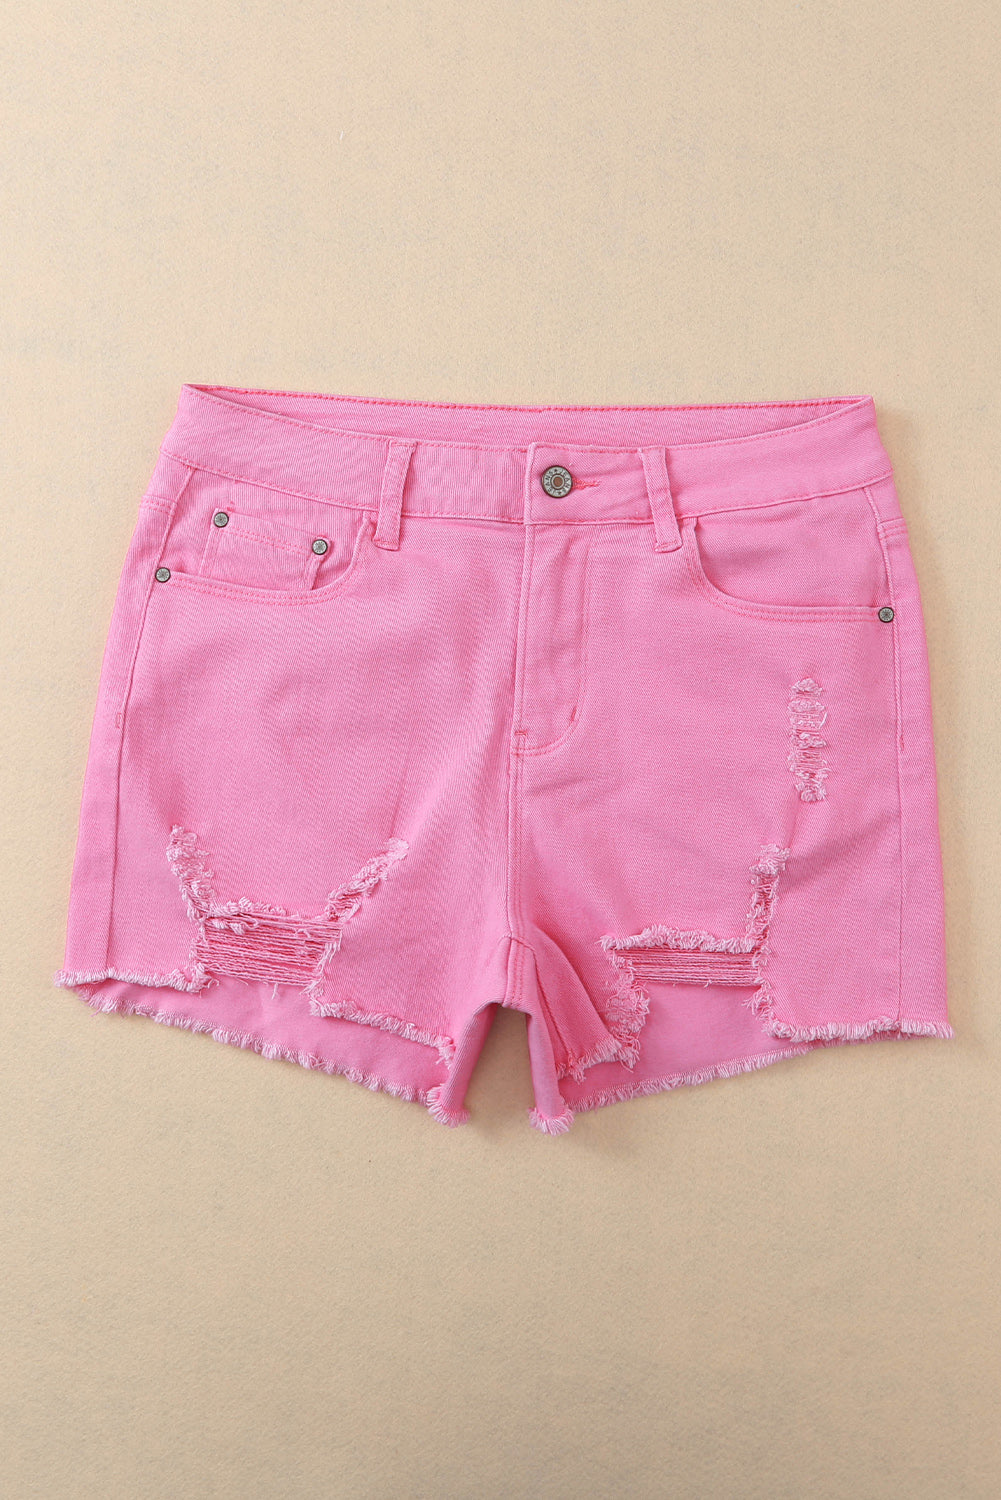 White Solid Color Distressed Denim Shorts